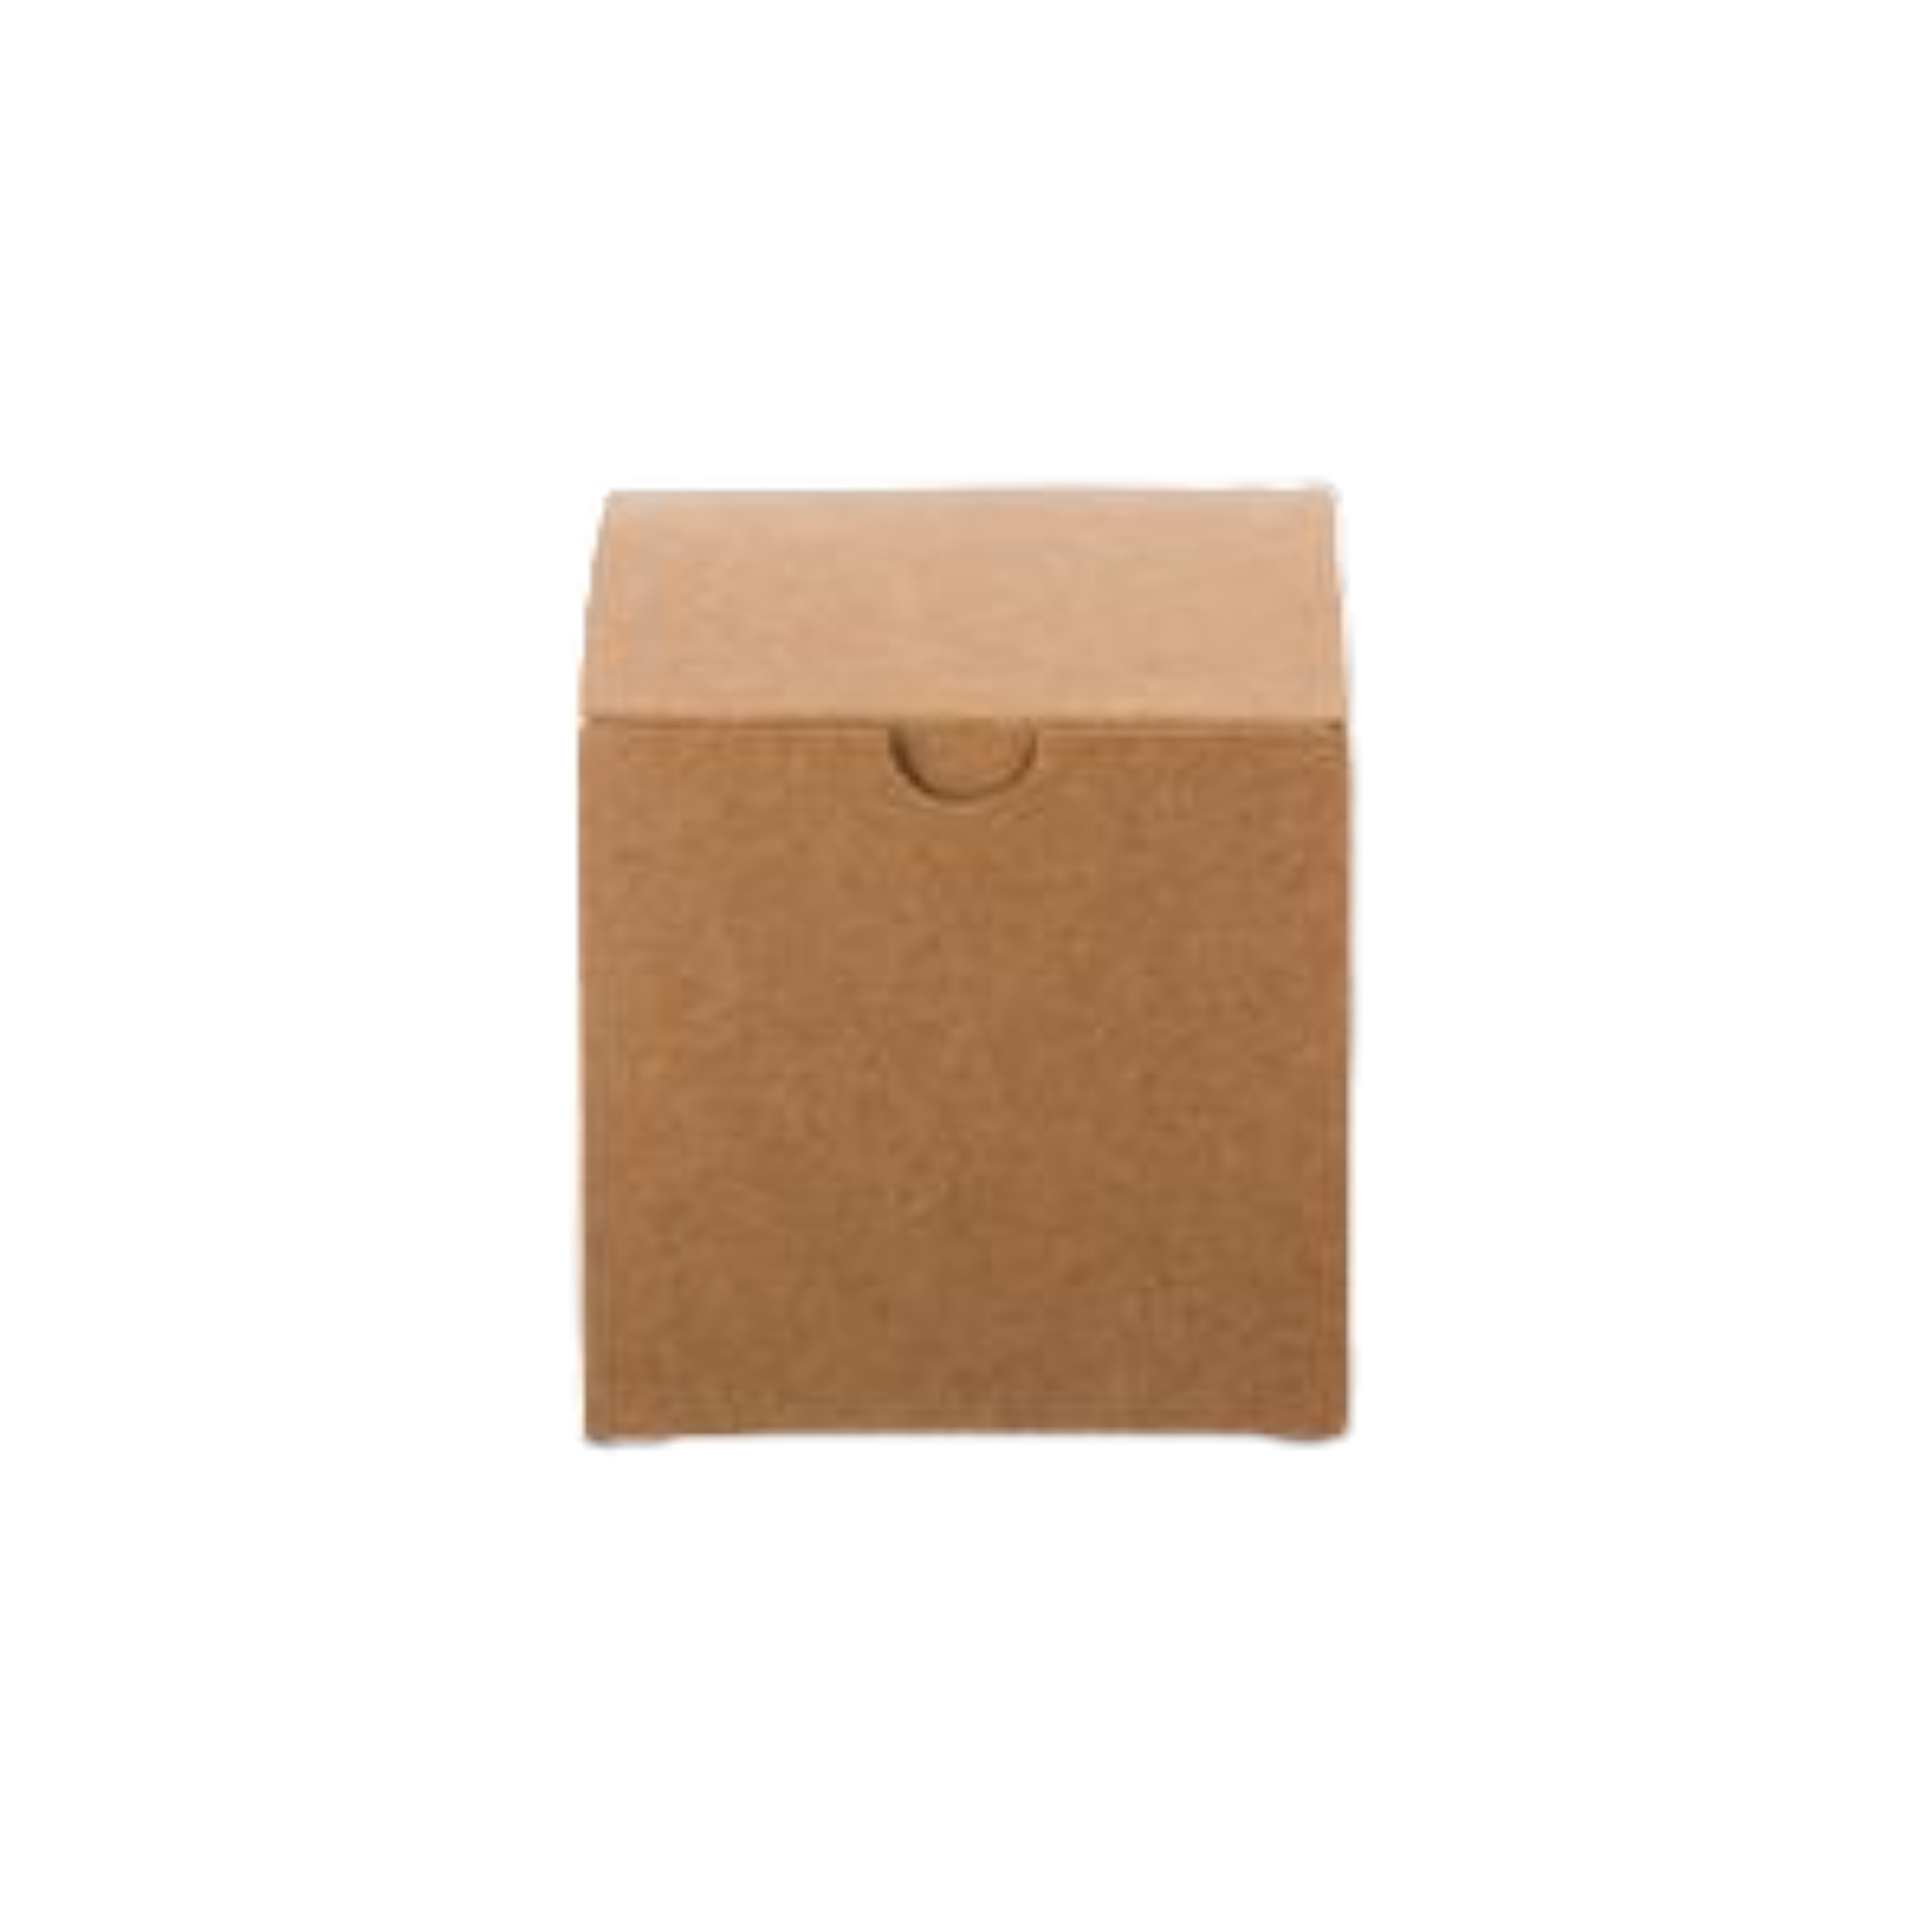 Kraft Gift Party Treats Boxes 10pack Brown 7.5cm Square